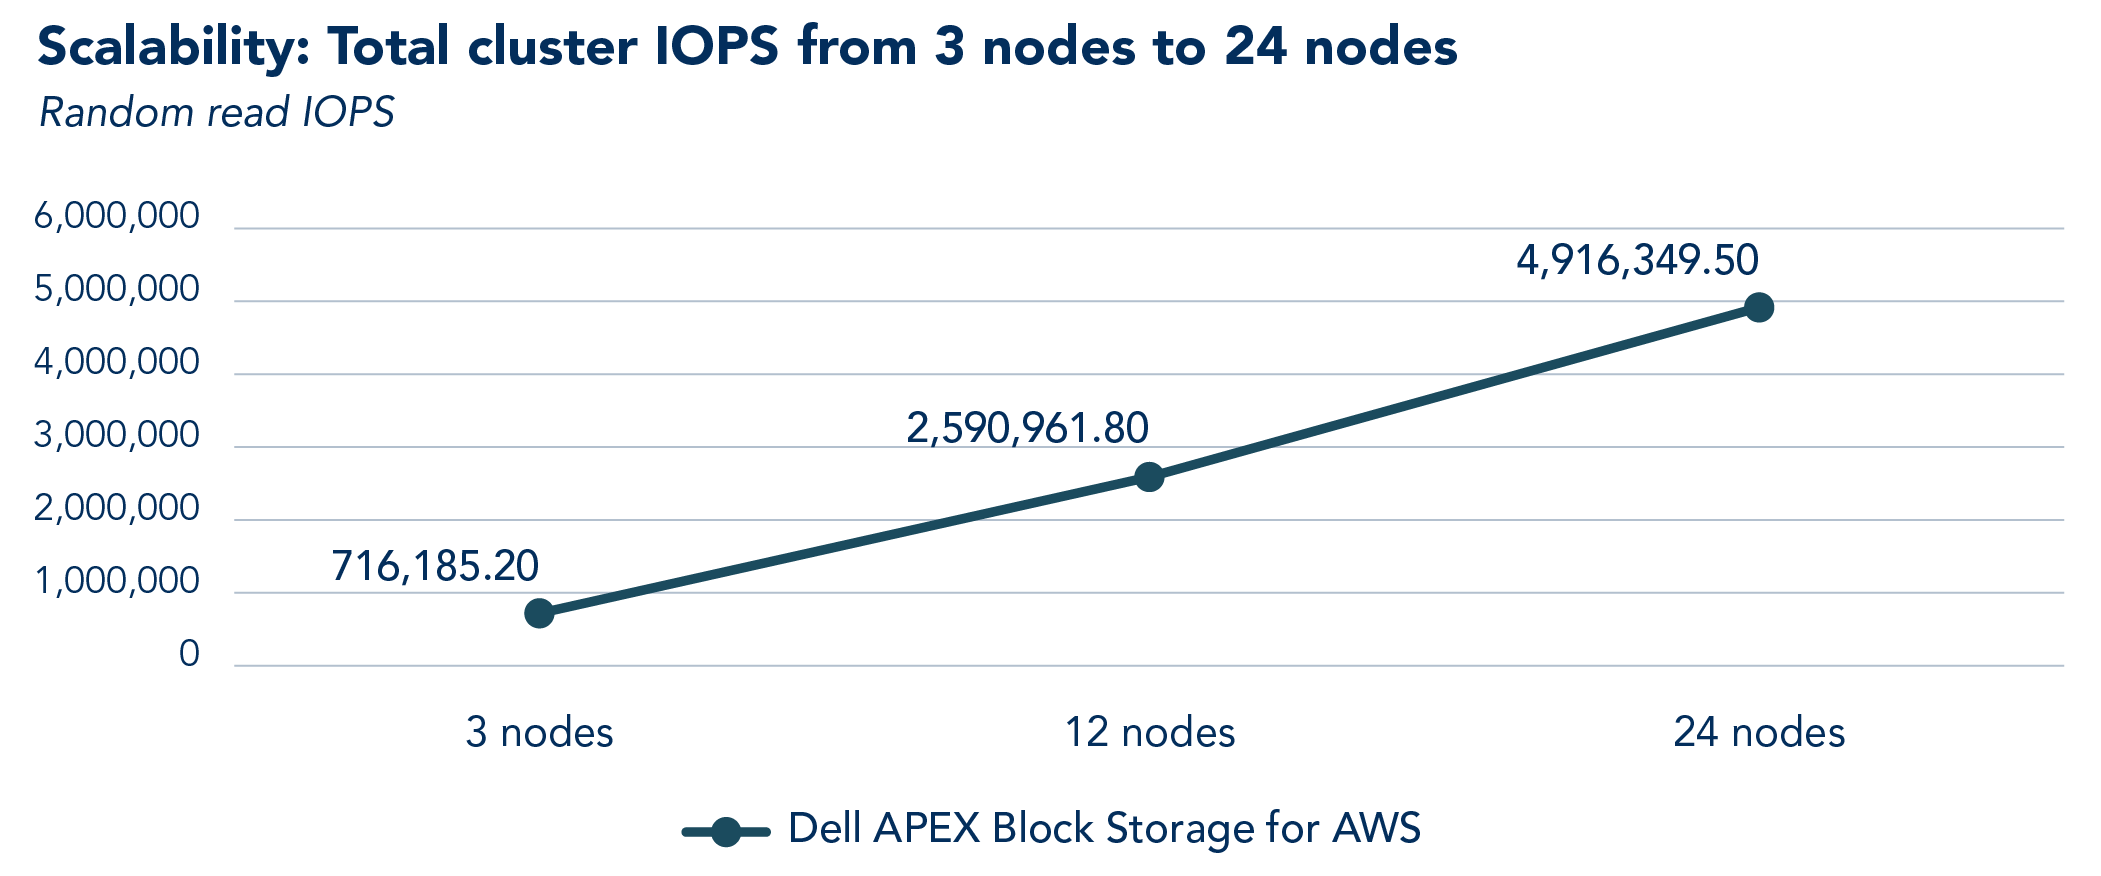 Line chart showing the random read IOPS scalability of the Dell APEX Block Storage for AWS cluster from 3 to 12 to 24 nodes. At 3 nodes, the cluster achieved 716,185.20 IOPS. At 12 nodes, the cluster achieved 2,590,961.80 IOPS. At 24 nodes, the cluster achieved 4,916,349.50 IOPS.